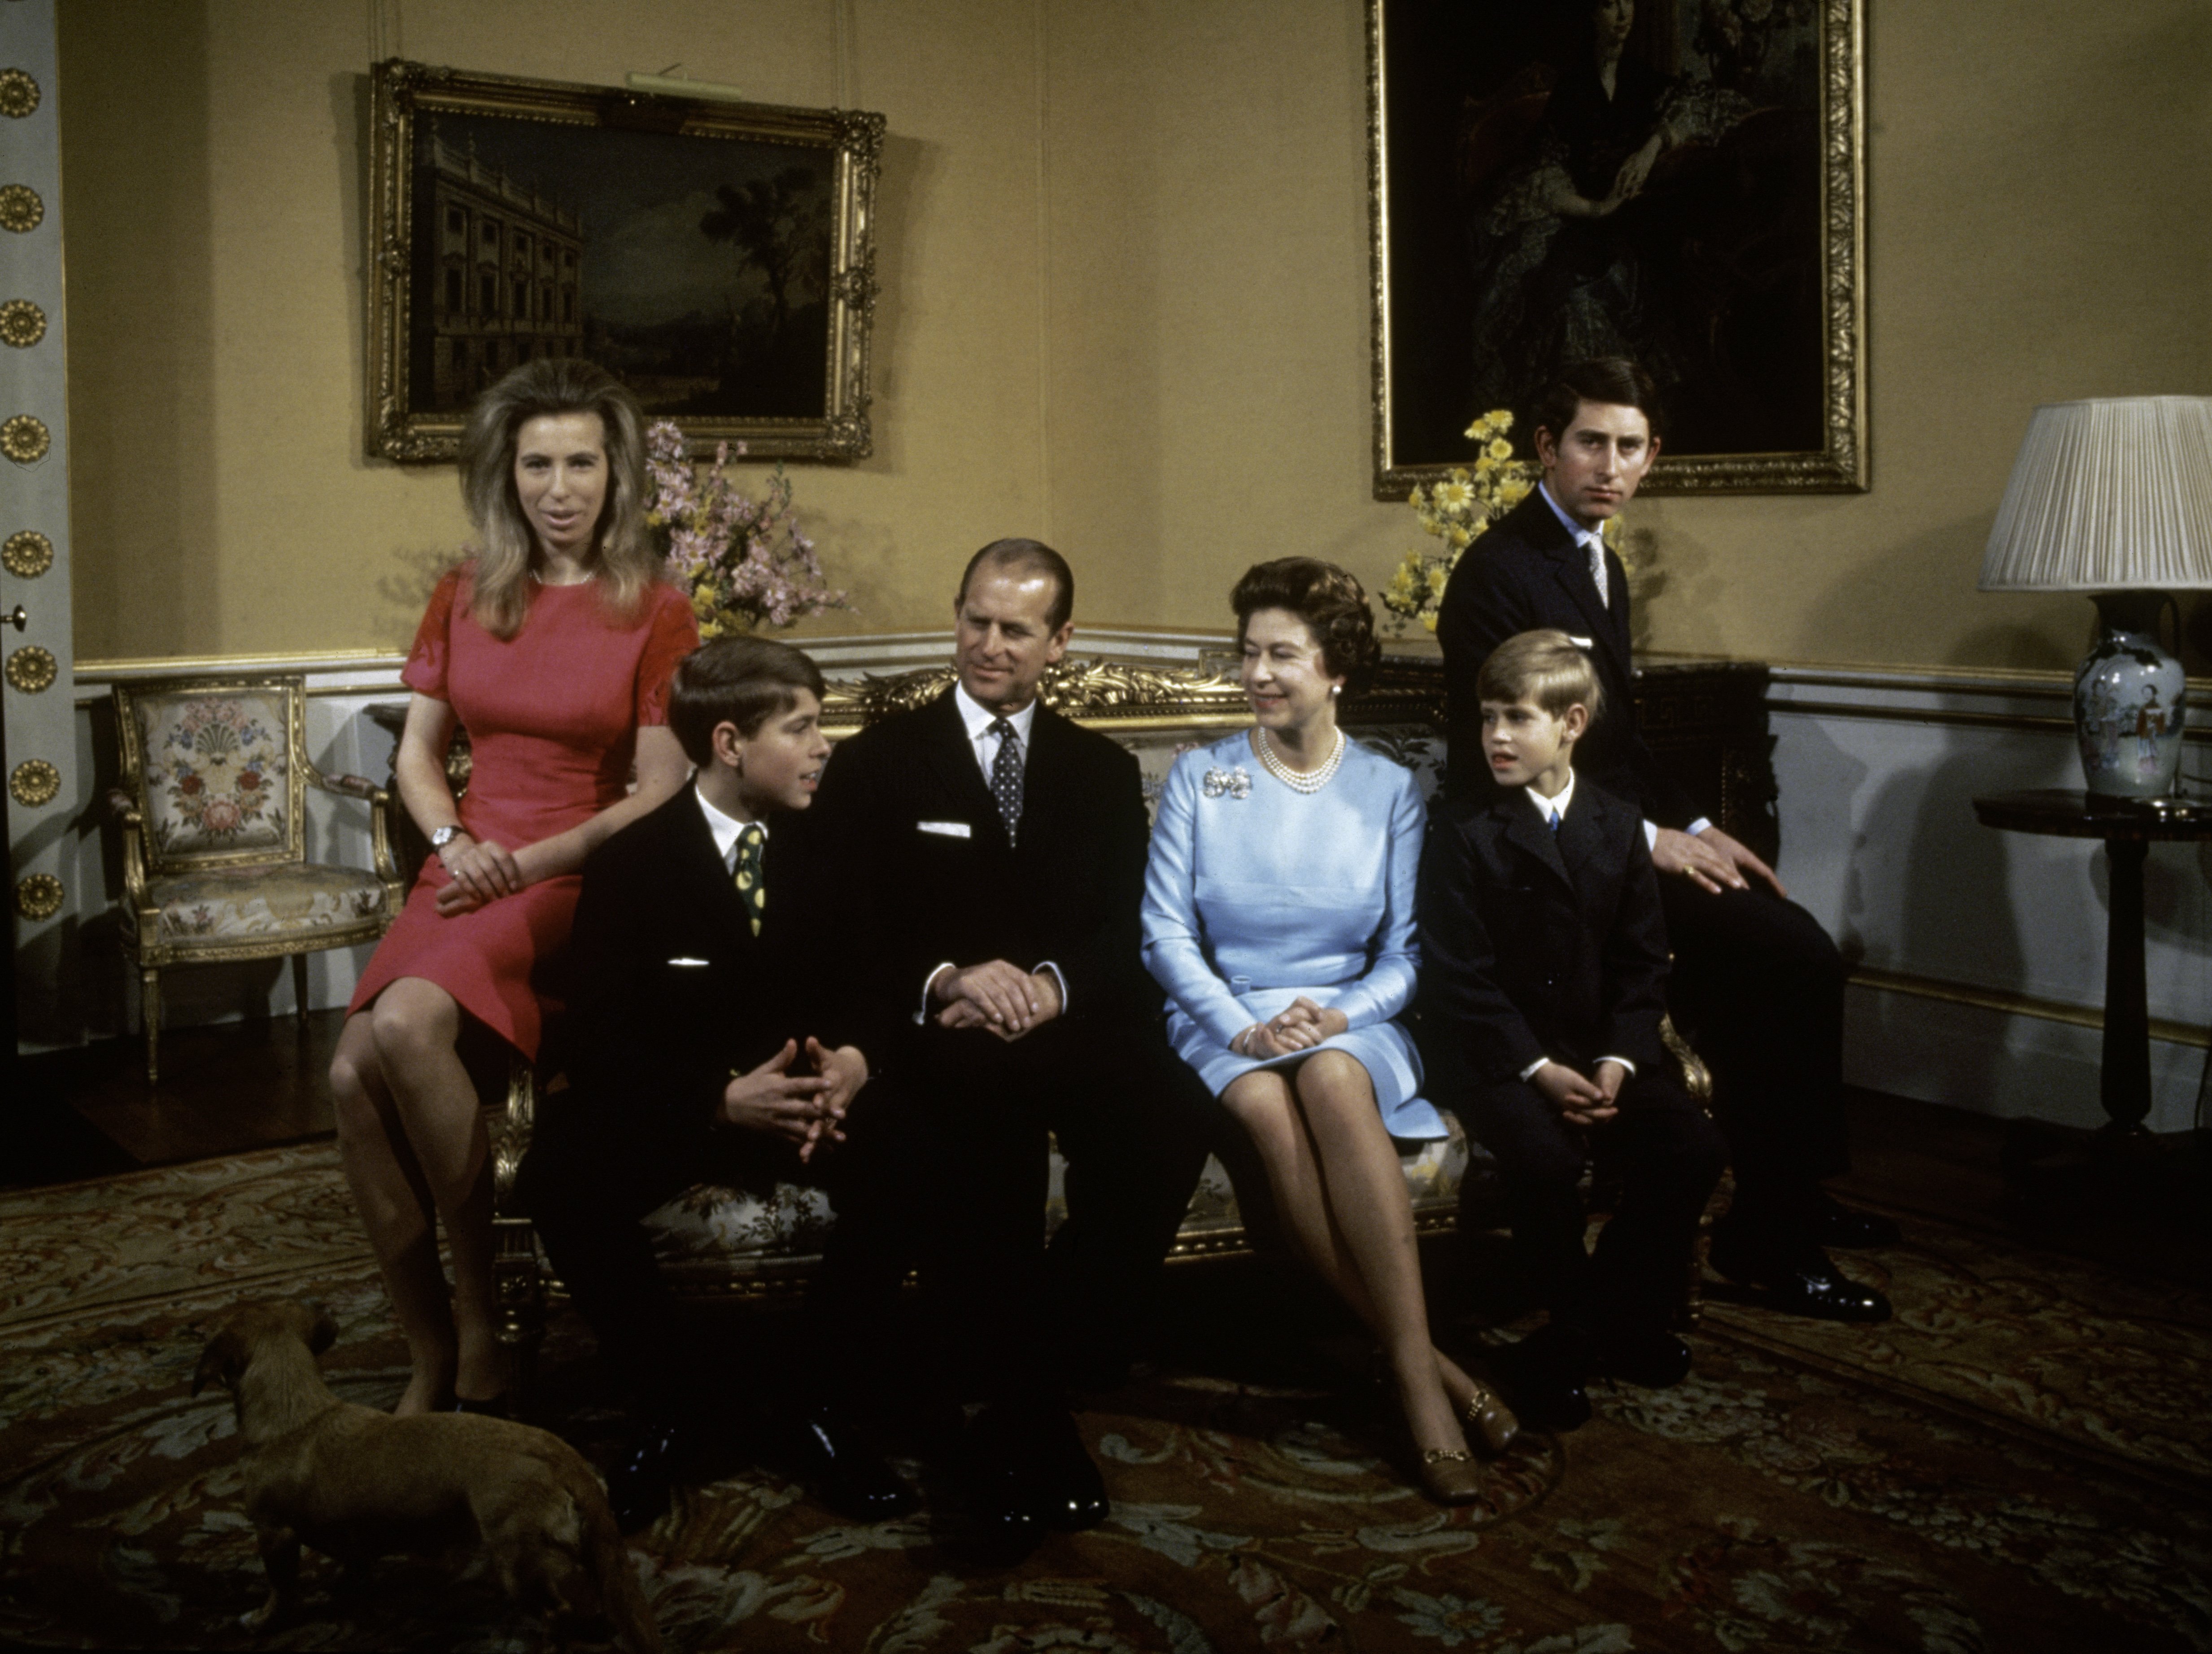  Princess Anne, Prince Andrew, Prince Philip, Queen Elizabeth, Prince Edward and Prince Charles. | Source: Getty Images 